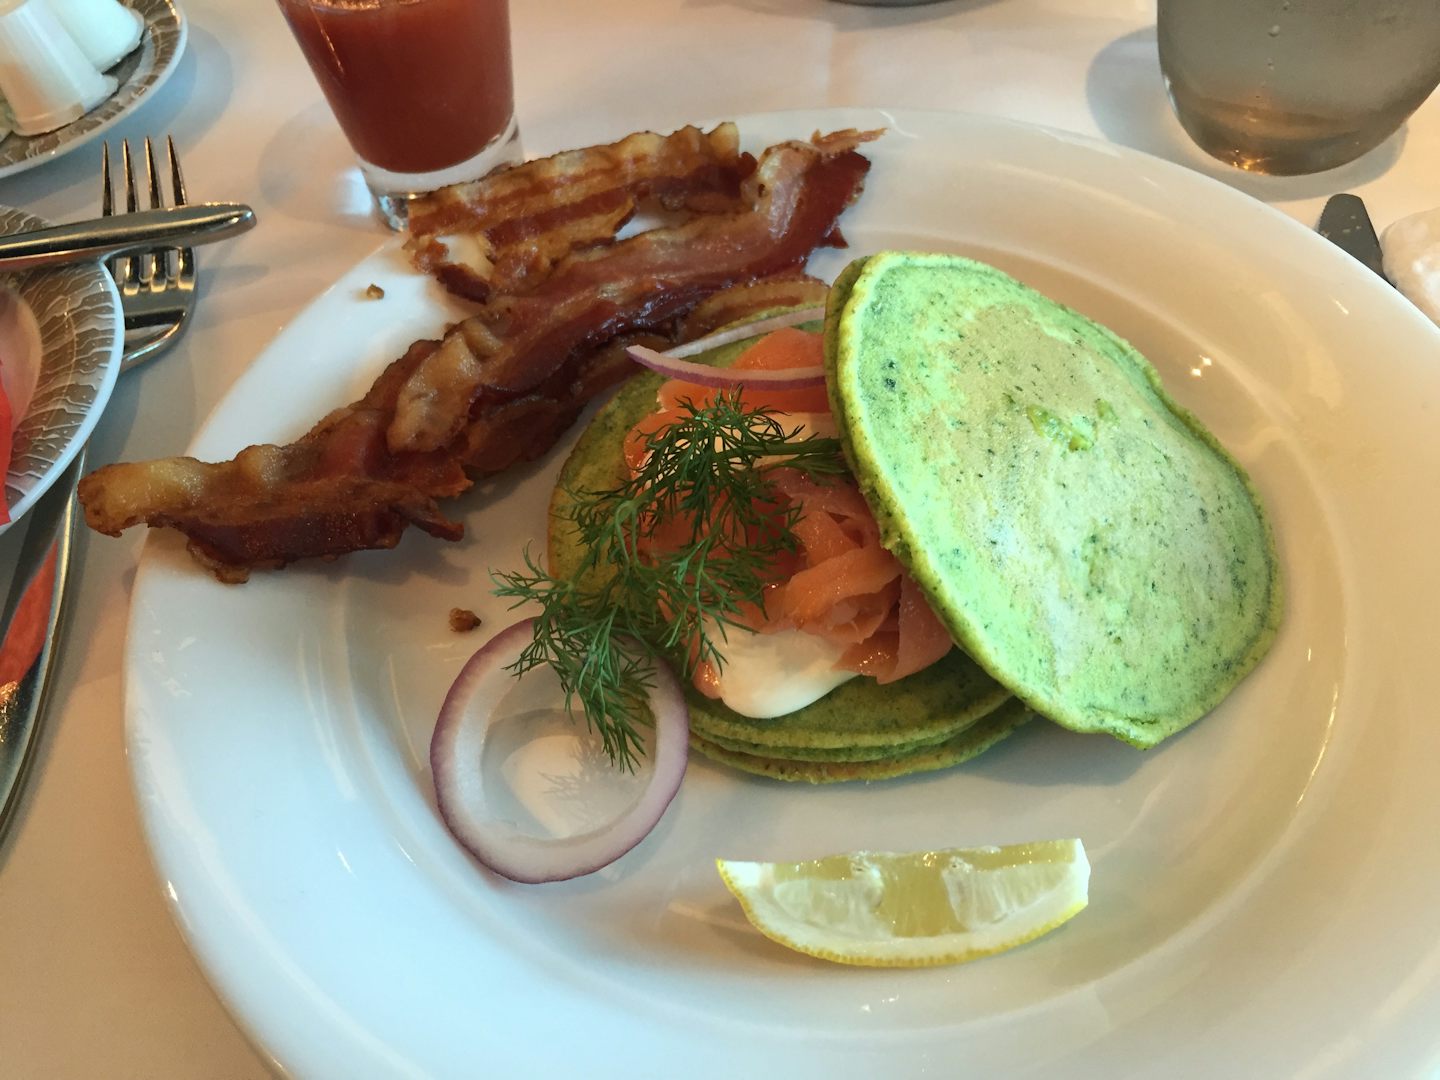 Spinach dill pancakes with salmon - YUM!